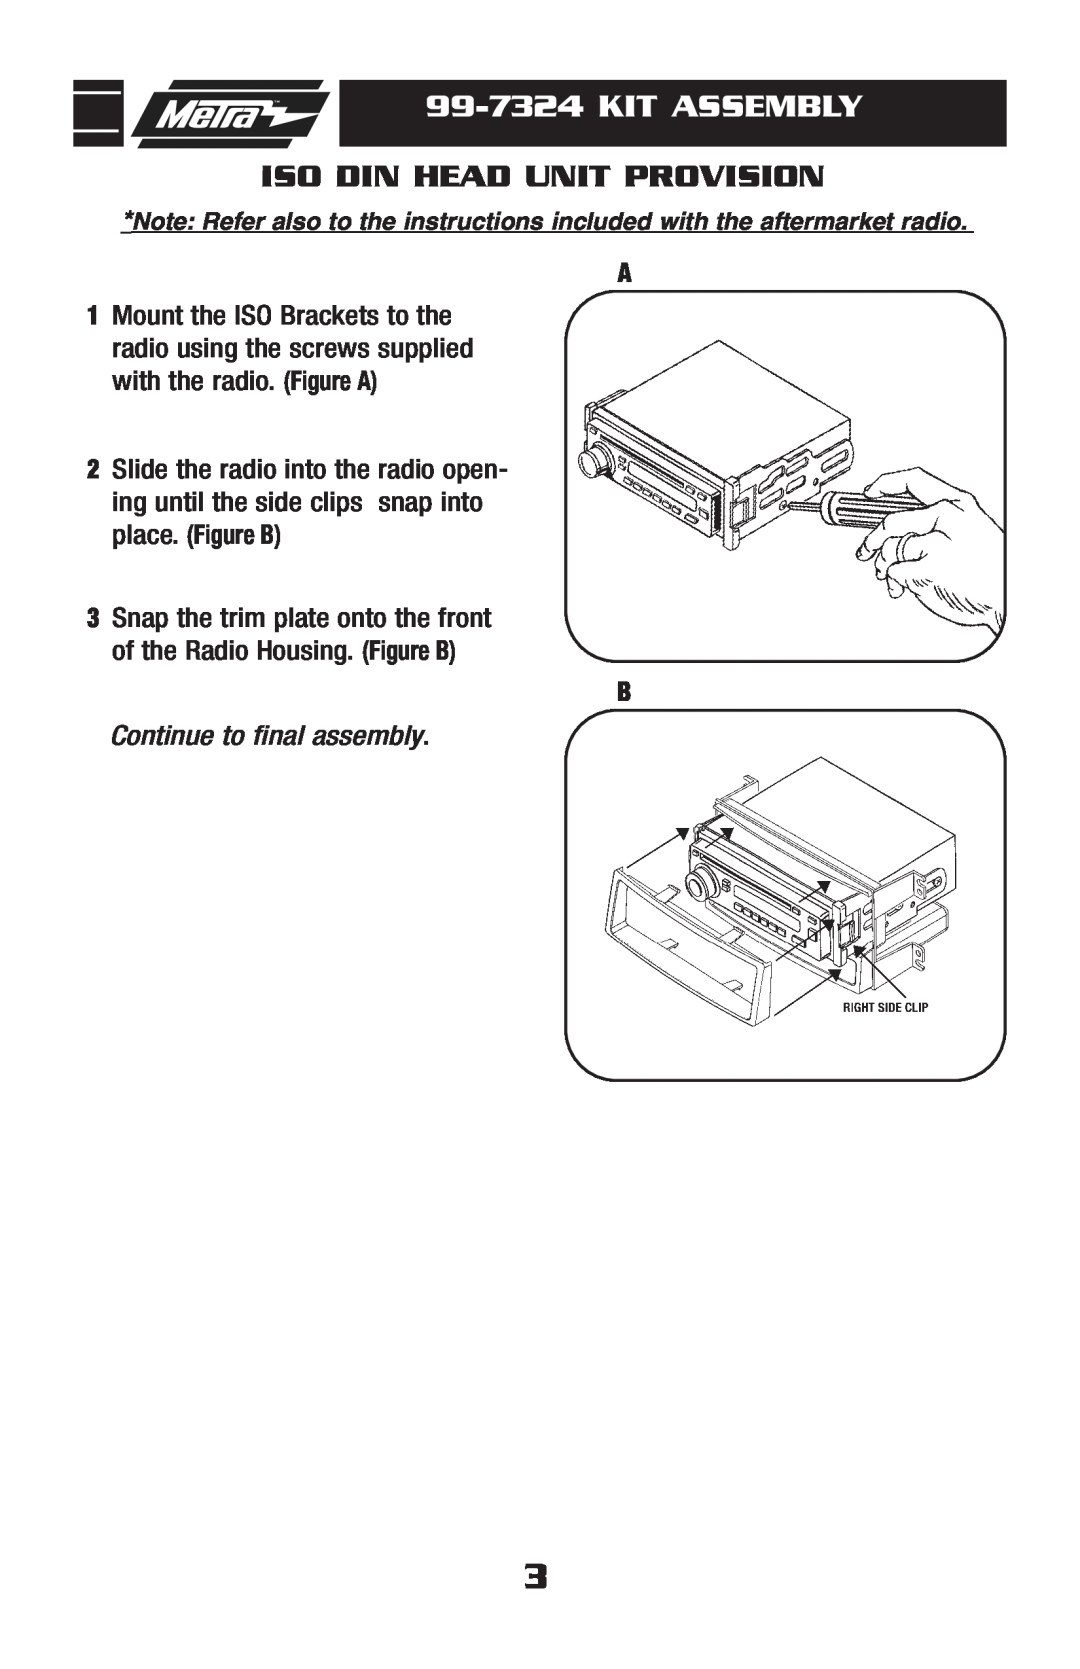 Metra Electronics installation instructions Iso Din Head Unit Provision, 99-7324KIT ASSEMBLY, Continue to final assembly 